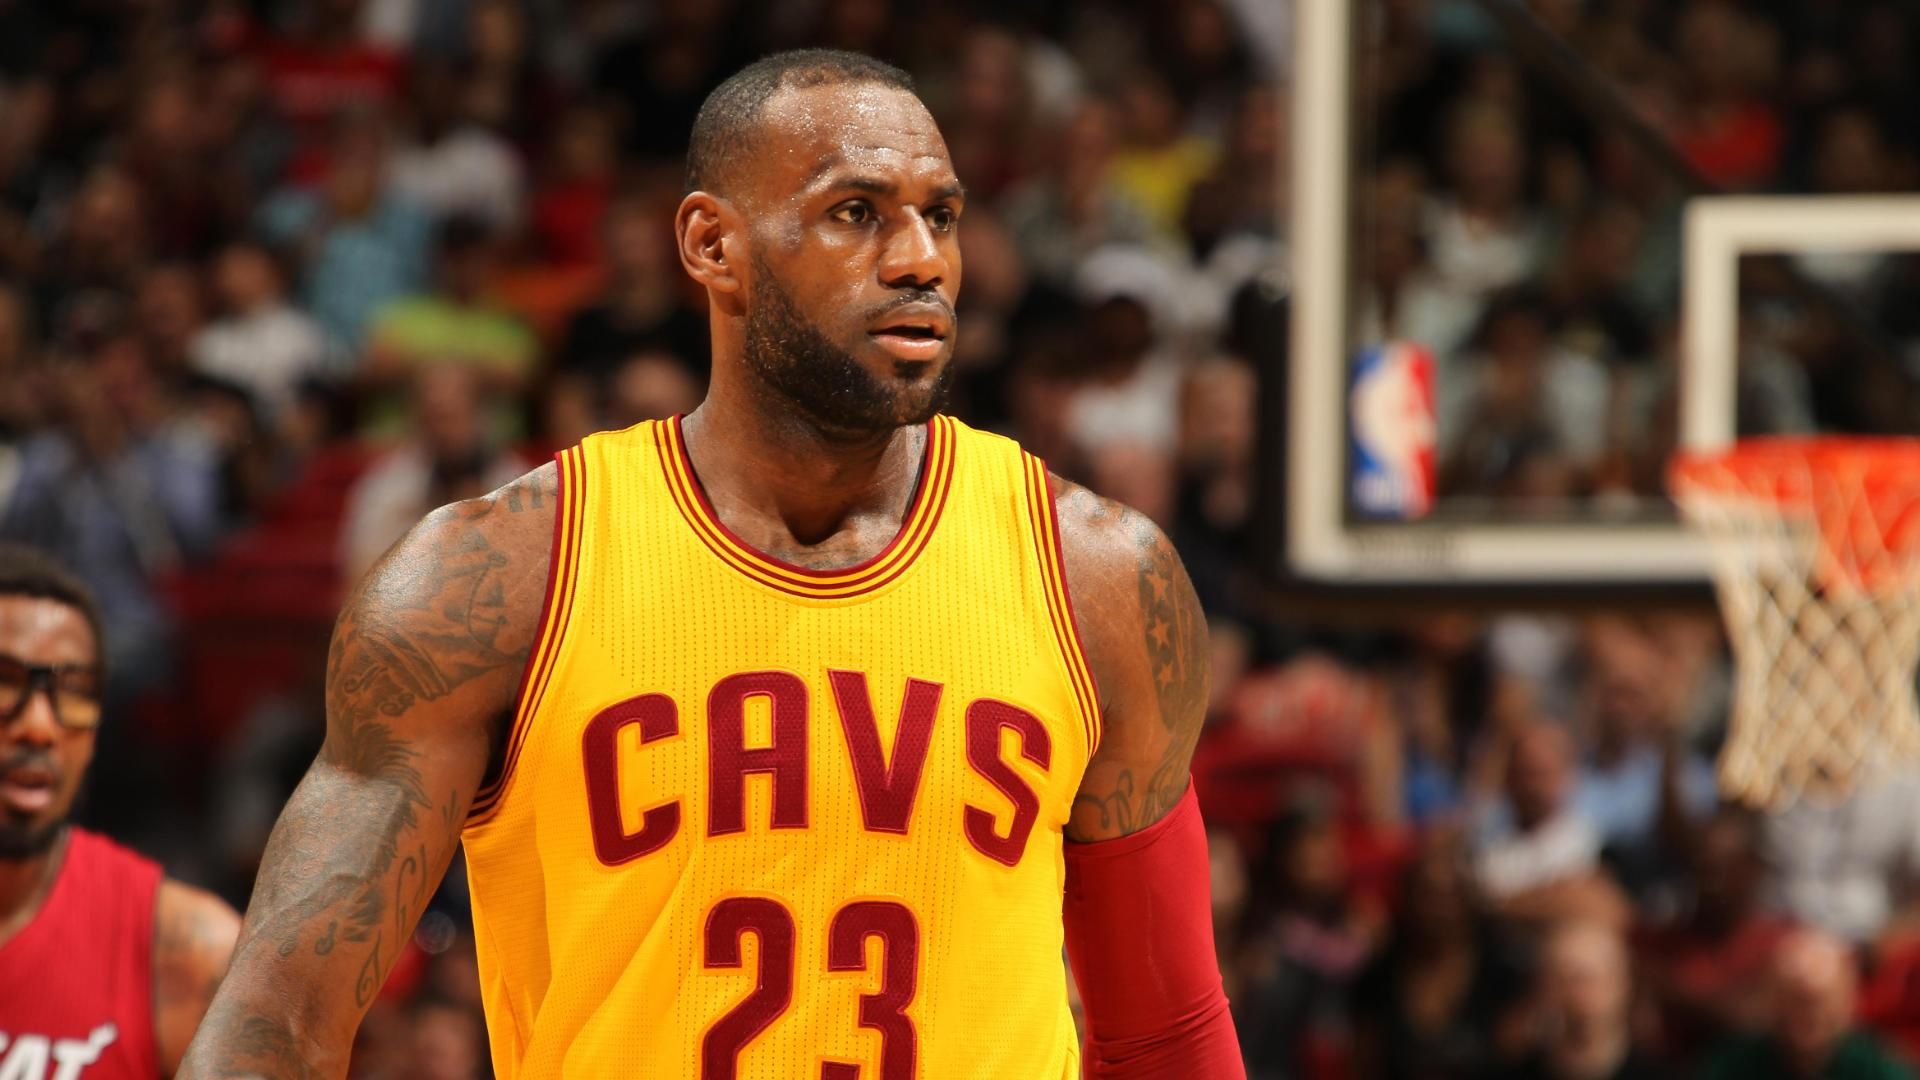 Windhorst: LeBron's not being a good leader right now